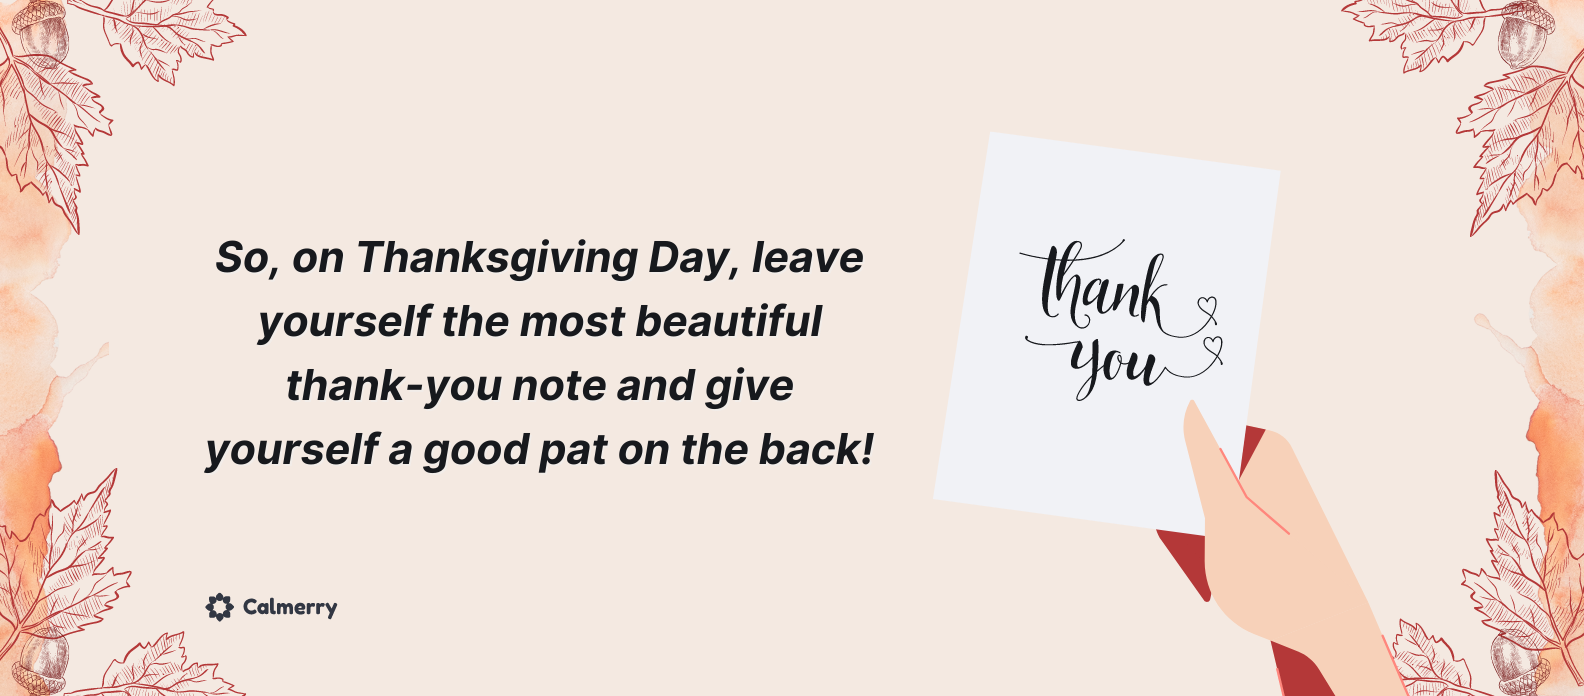 On Thanksgiving Day, leave yourself the most beautiful thank-you note and give yourself a good pat on the back! 